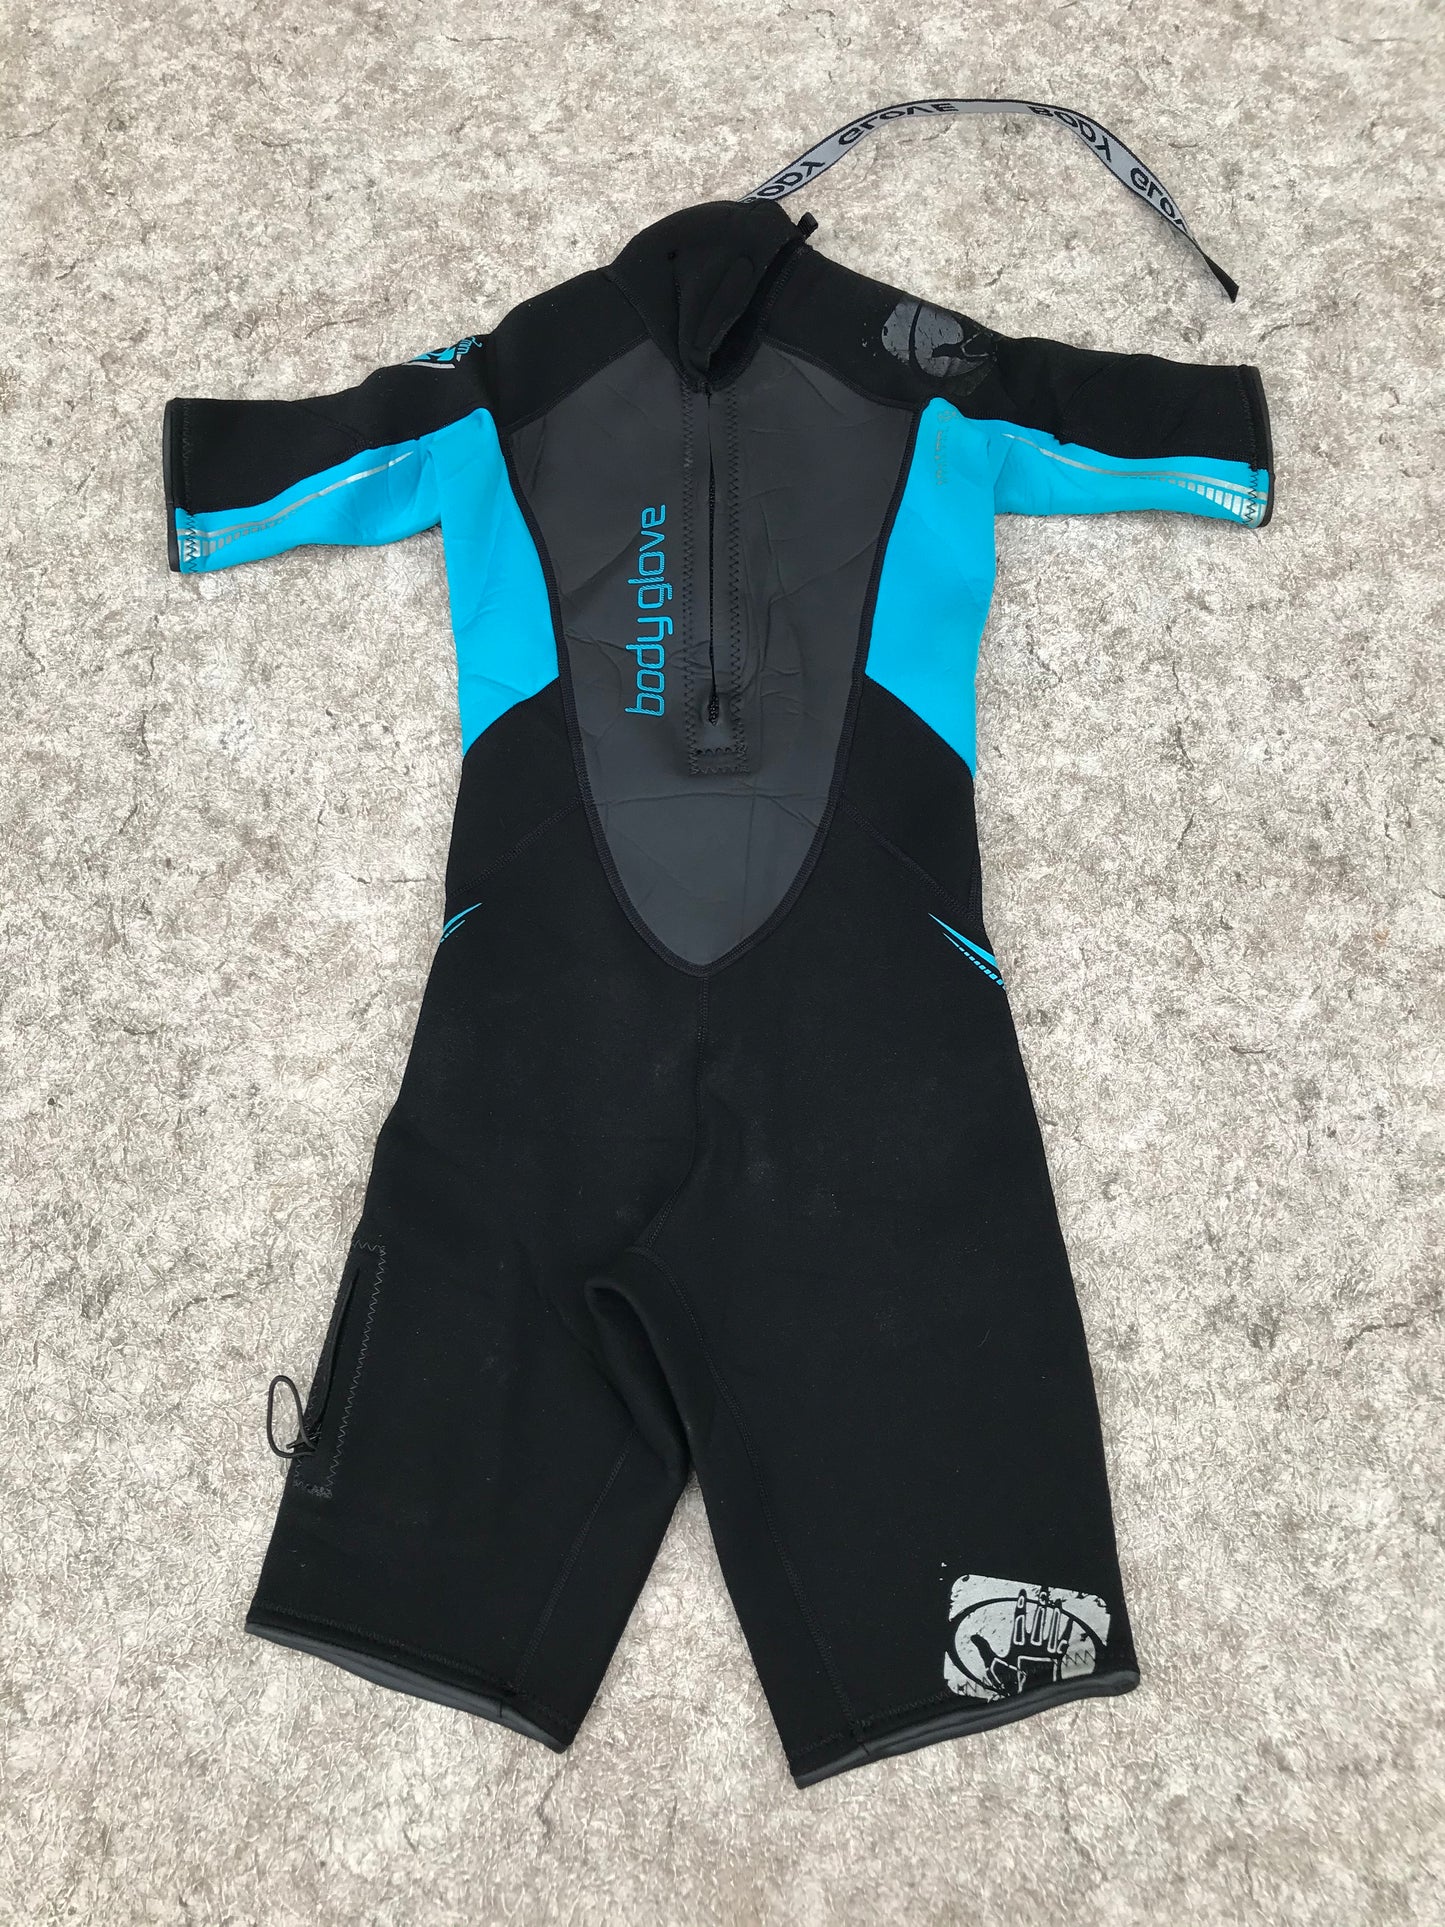 Wetsuit Ladies Size 5-6 Body Glove 2-3 mm Blue Black Silver New Demo Model